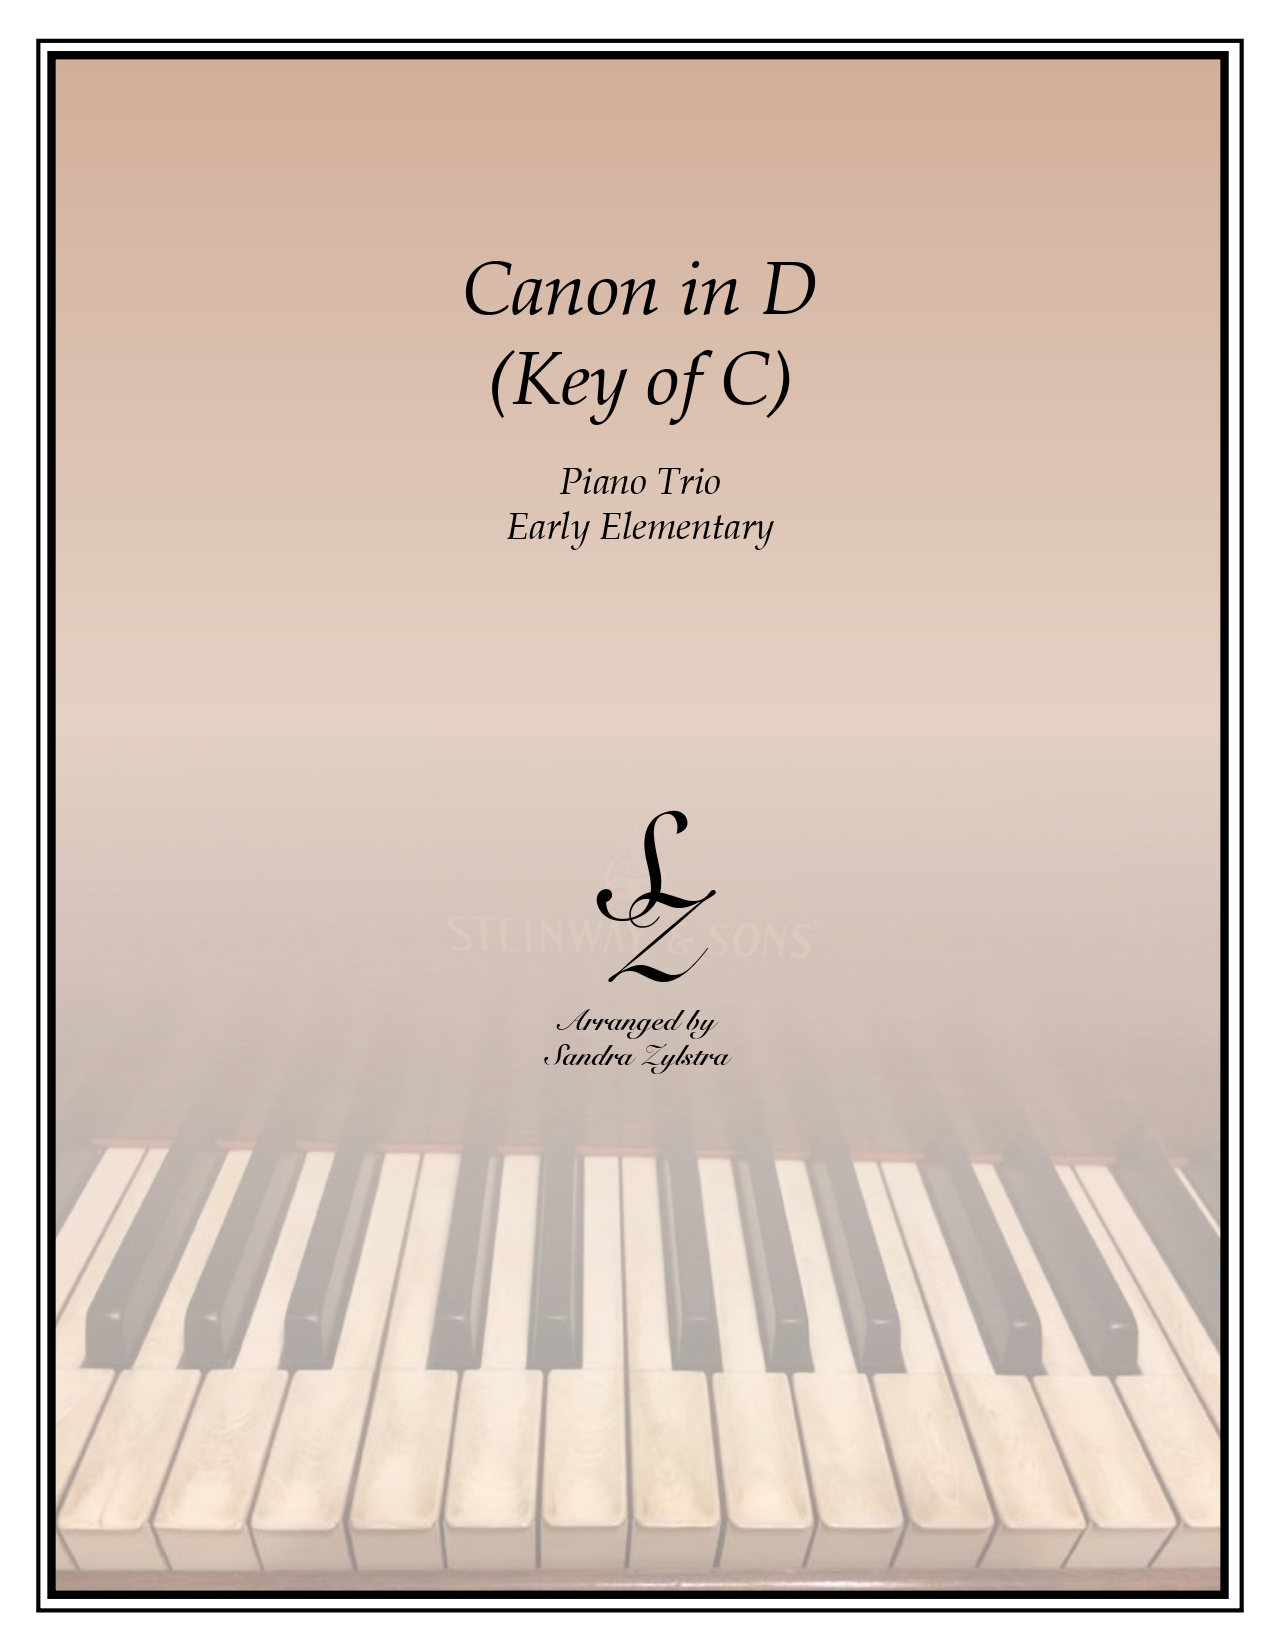 Canon In D key of C trio parts cover page 00011